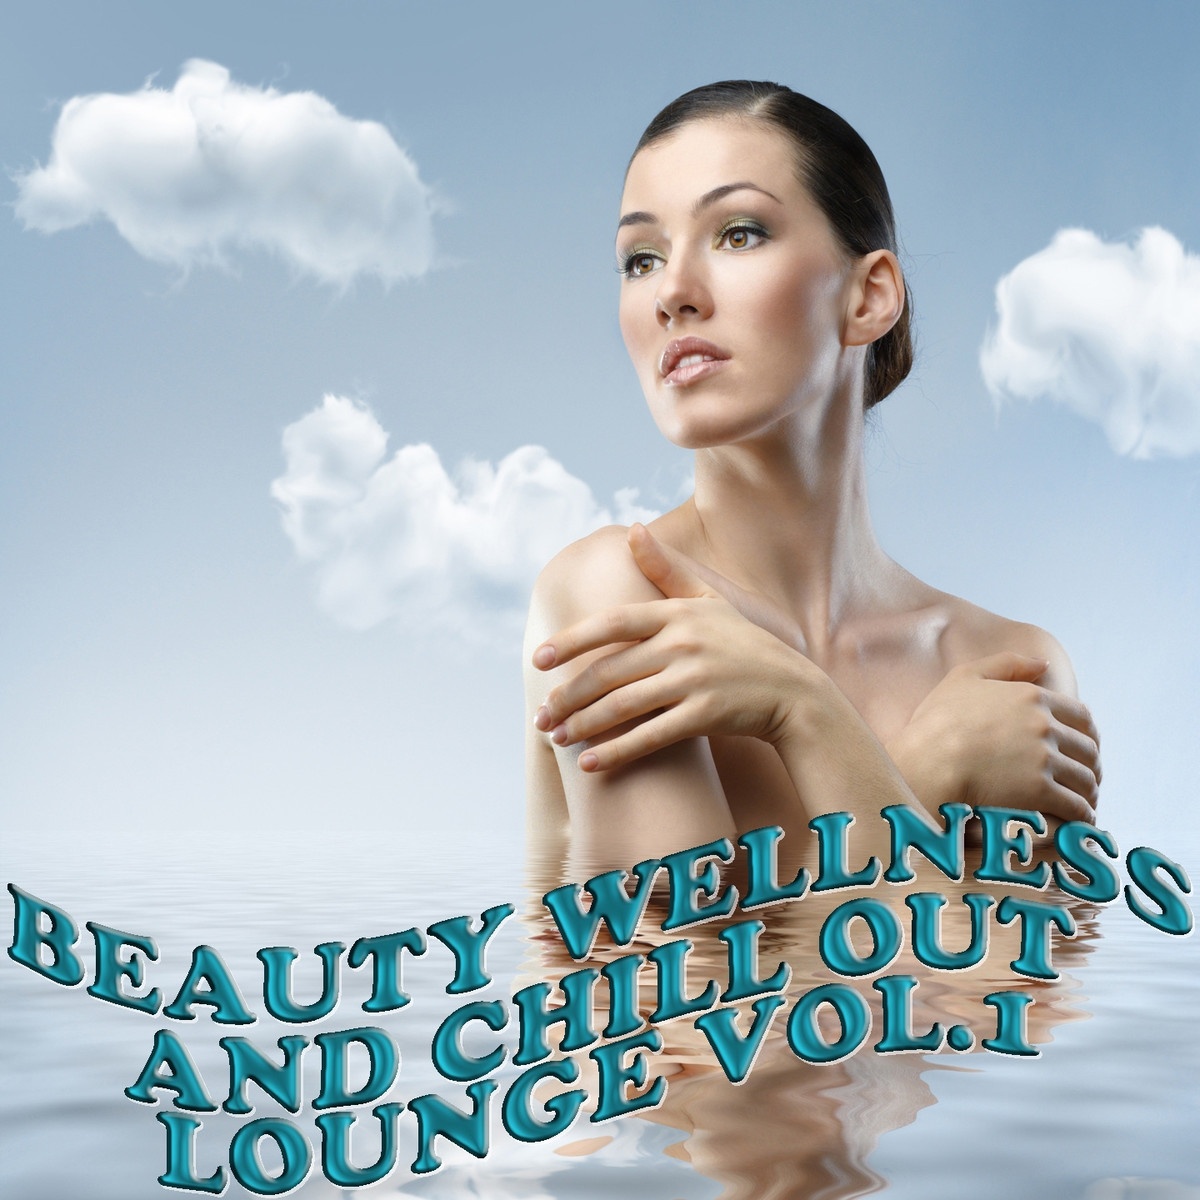 Beauty Wellness And Chill Out Lounge, Vol. 1 (Musical Health Recoveries)